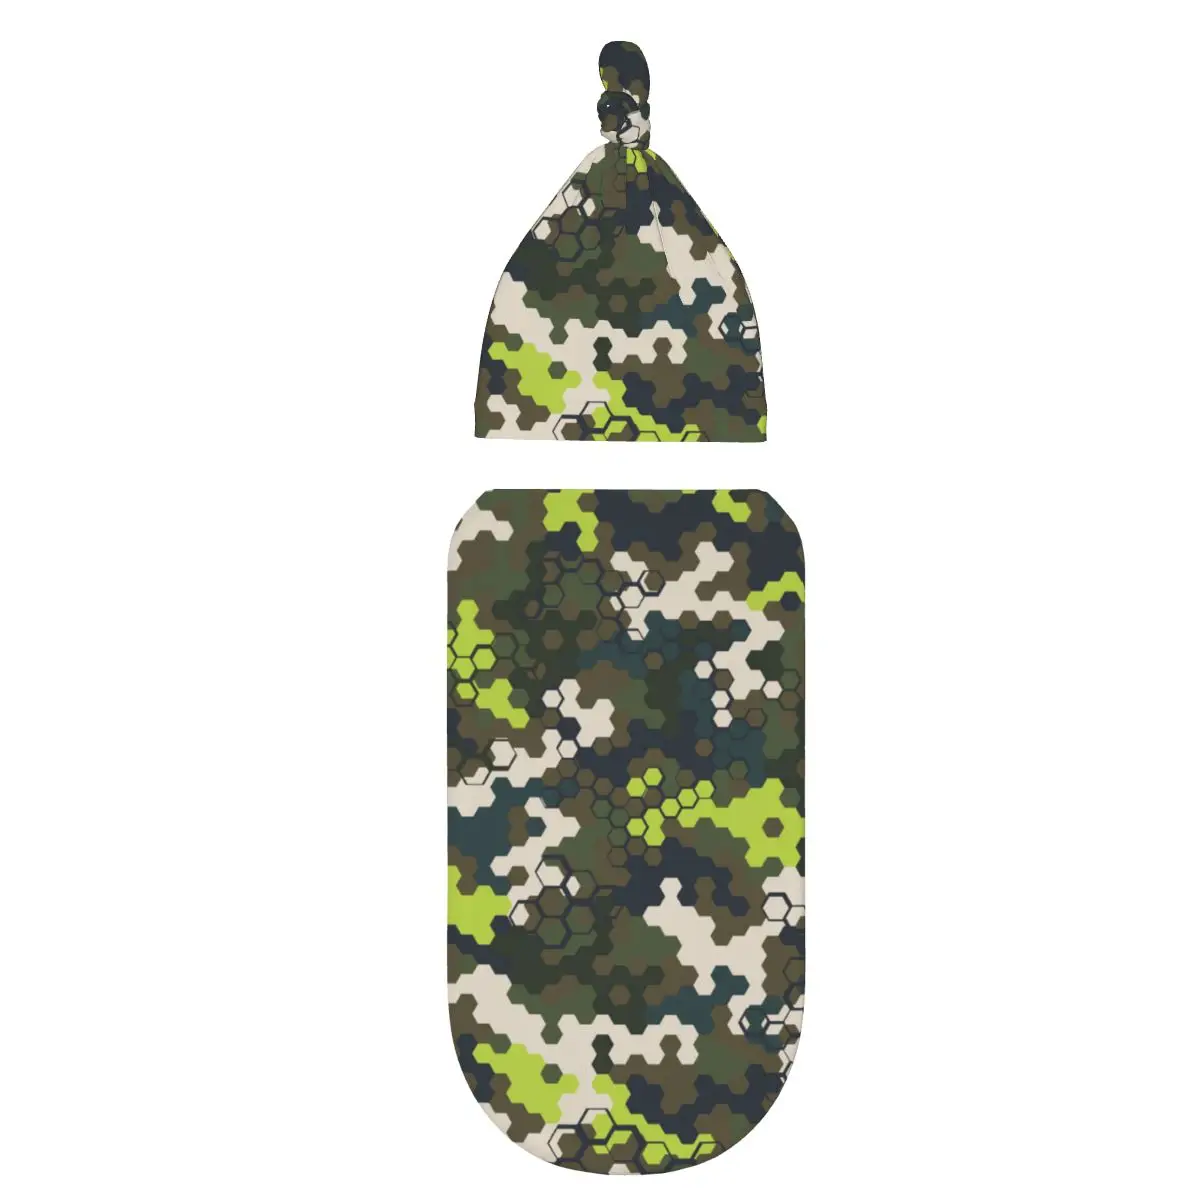 

Hexagonal Camouflage Baby Swaddle Blanket for Newborn Baby Swaddle Receive Blanket